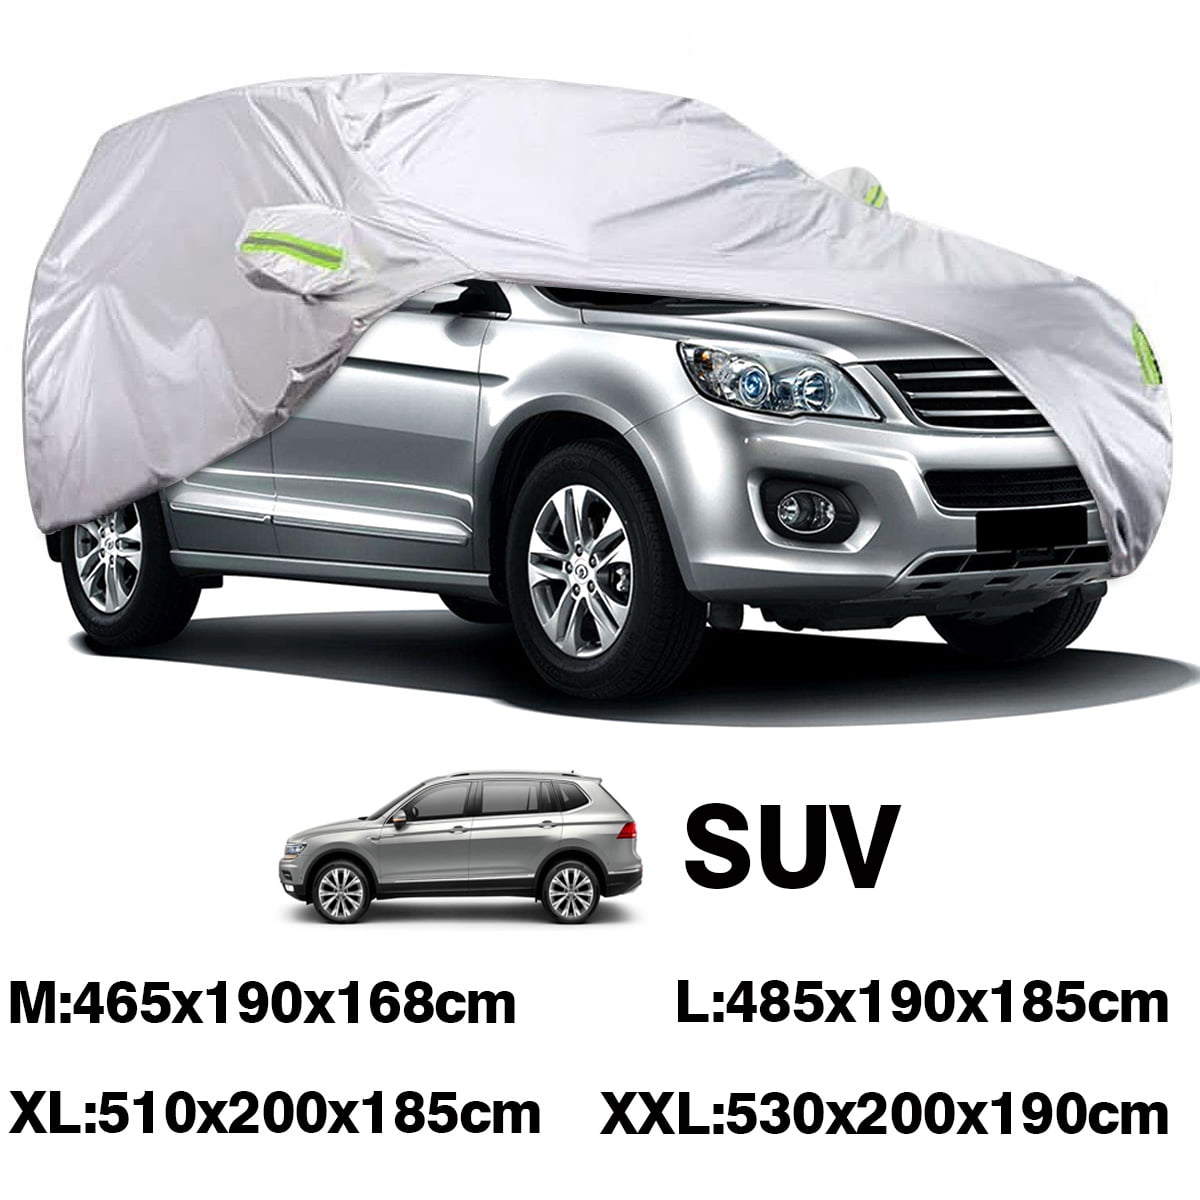 Van OxGord Executive Storm-Proof Auto Cover and Truck 100 Water-Proof 7 Layers -Developed for Any All Conditions Fits up to 206 Inches Ready-Fit Semi Glove Fit fro SUV 